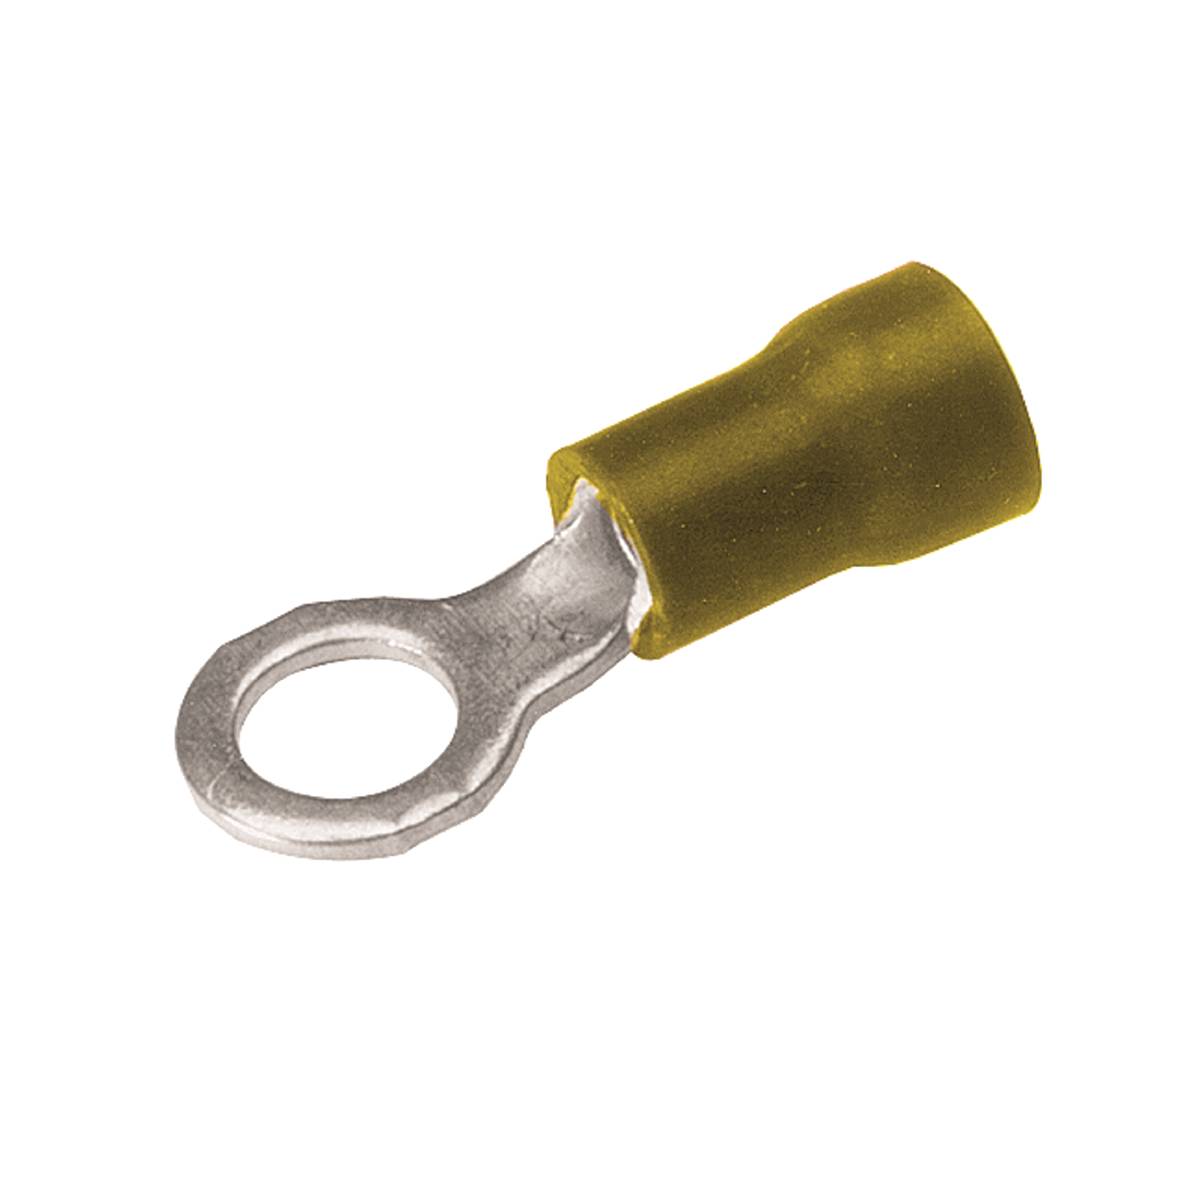 BURNDY® VINYLUG™ TP1038 Type TP Terminal With 0.26 in Dia Insulation, 12 to 10 AWG Conductor, 1.27 in L, Deep V-Groove Serrated Barrel, Copper, Yellow